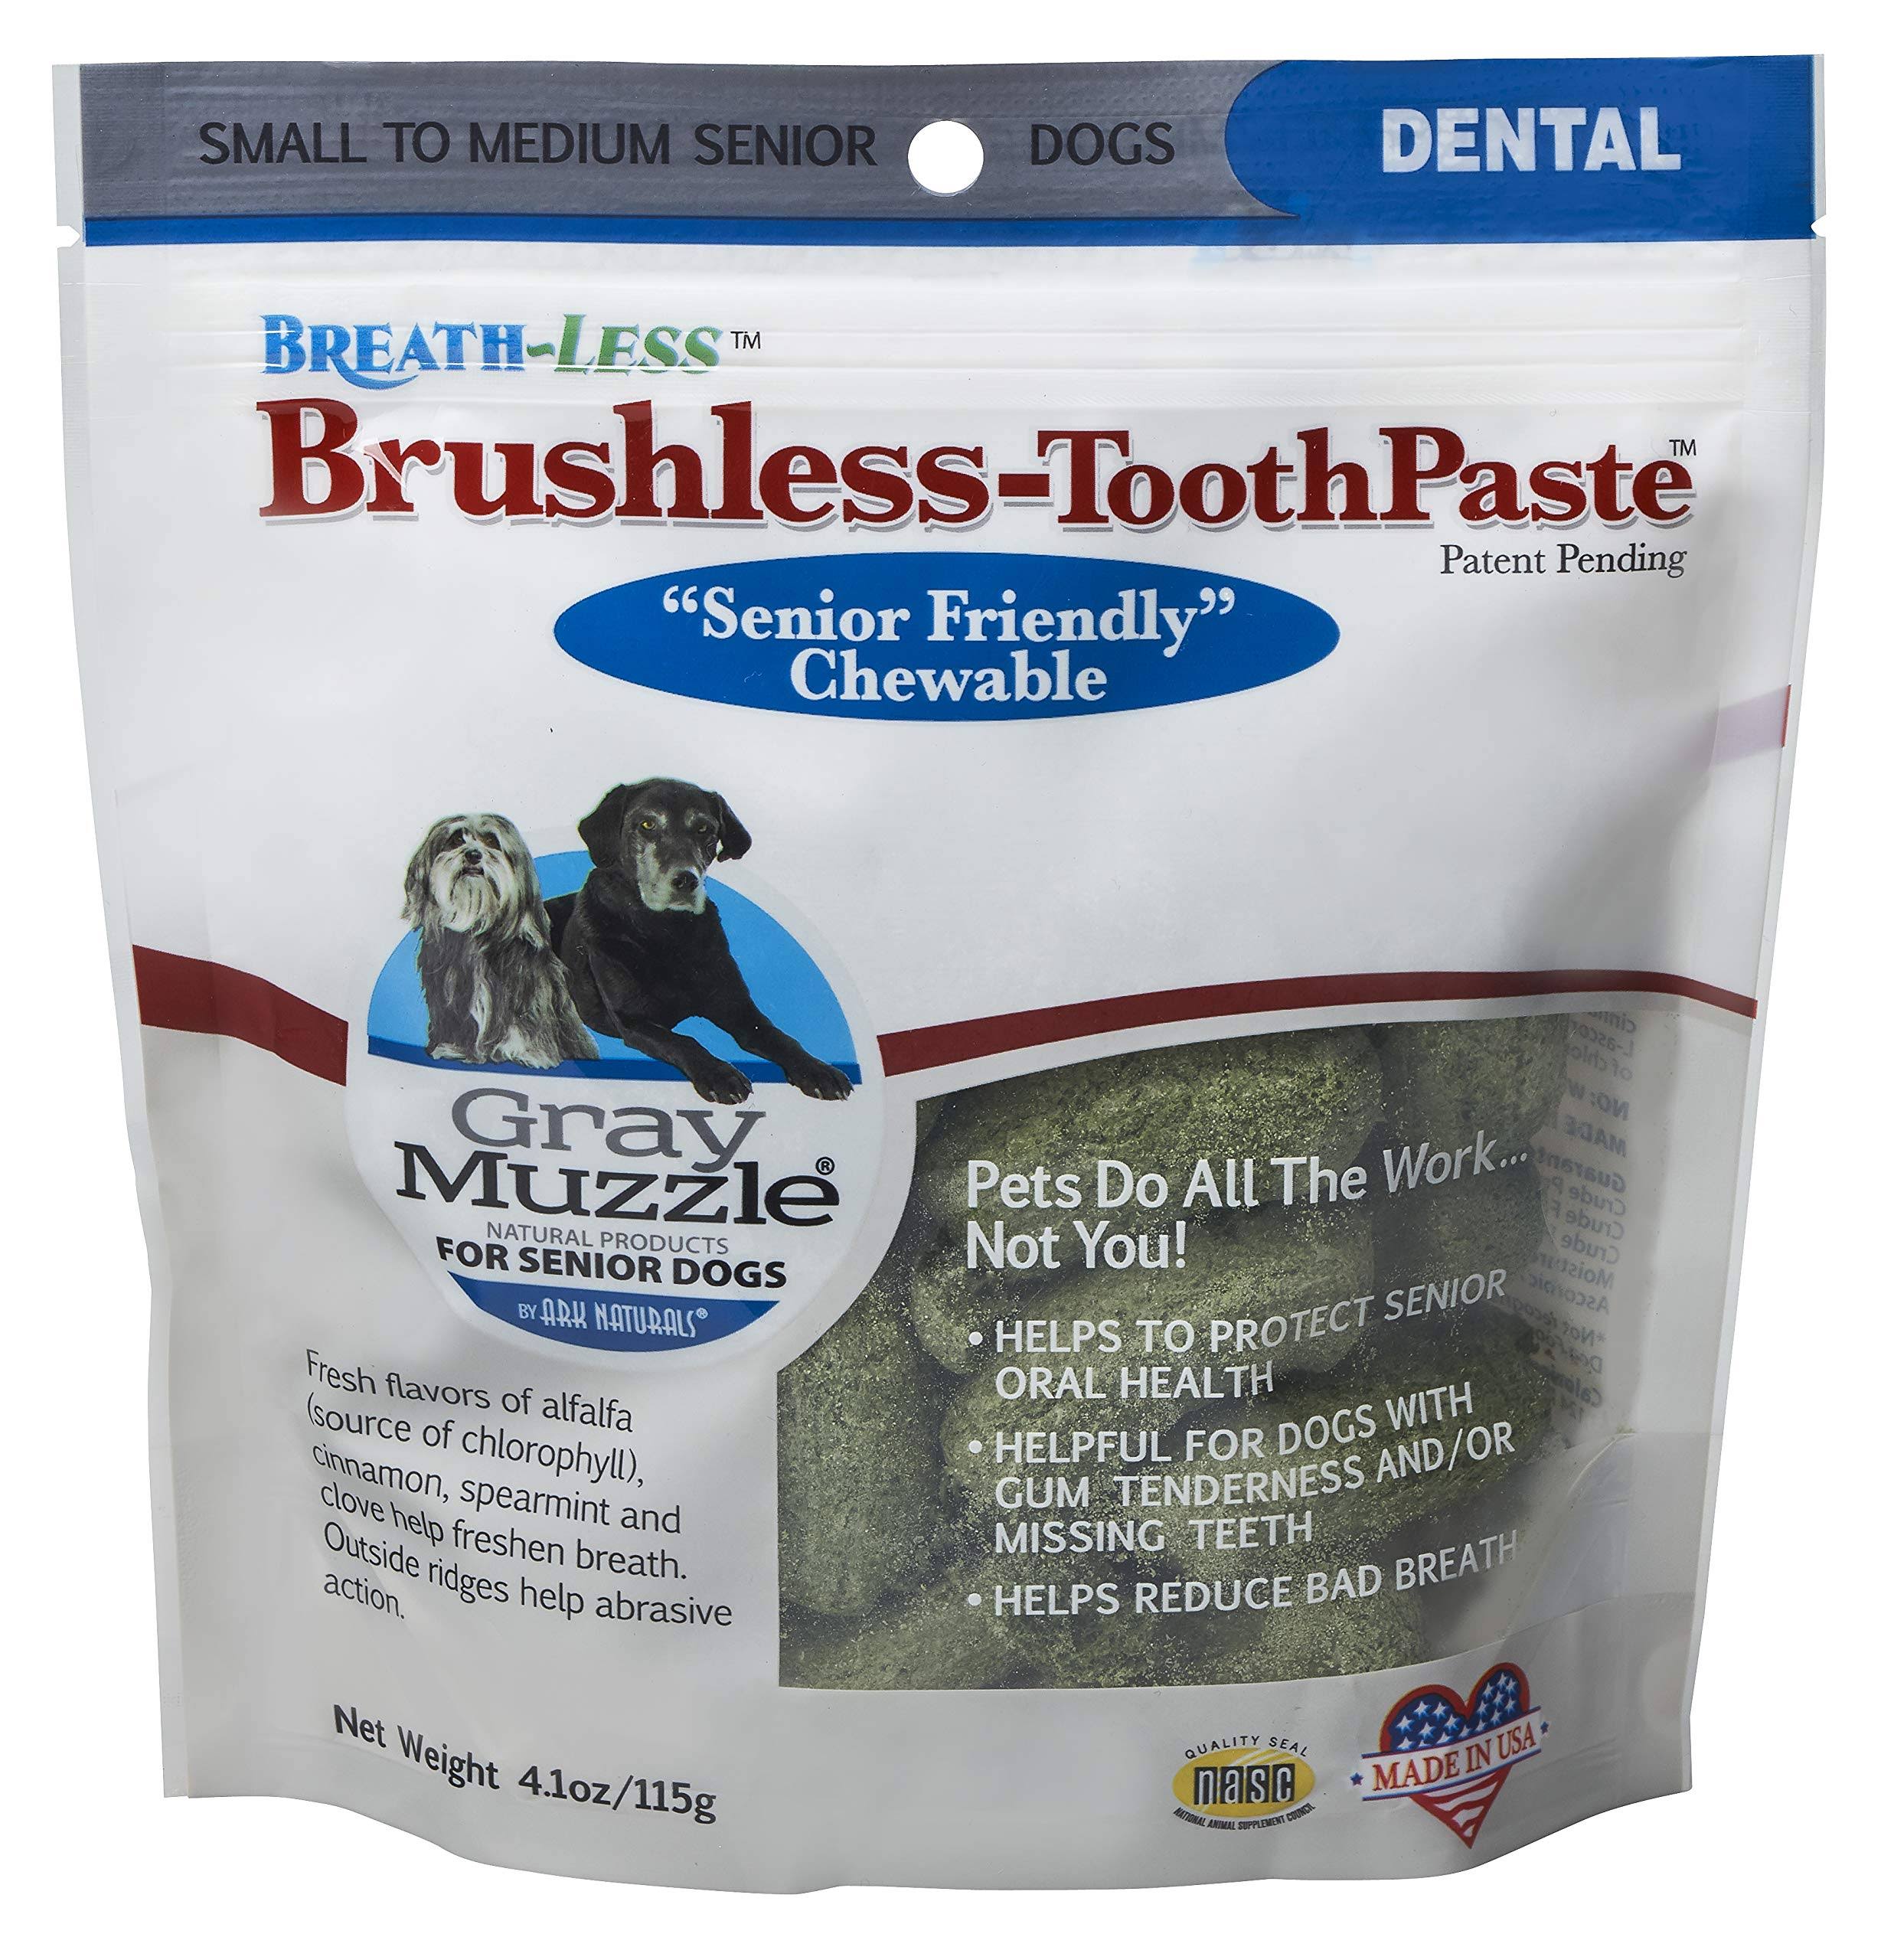 Ark Naturals Brushless Tooth Paste Chewable Dental Treats for Dogs - Gray Muzzle, 4.1oz